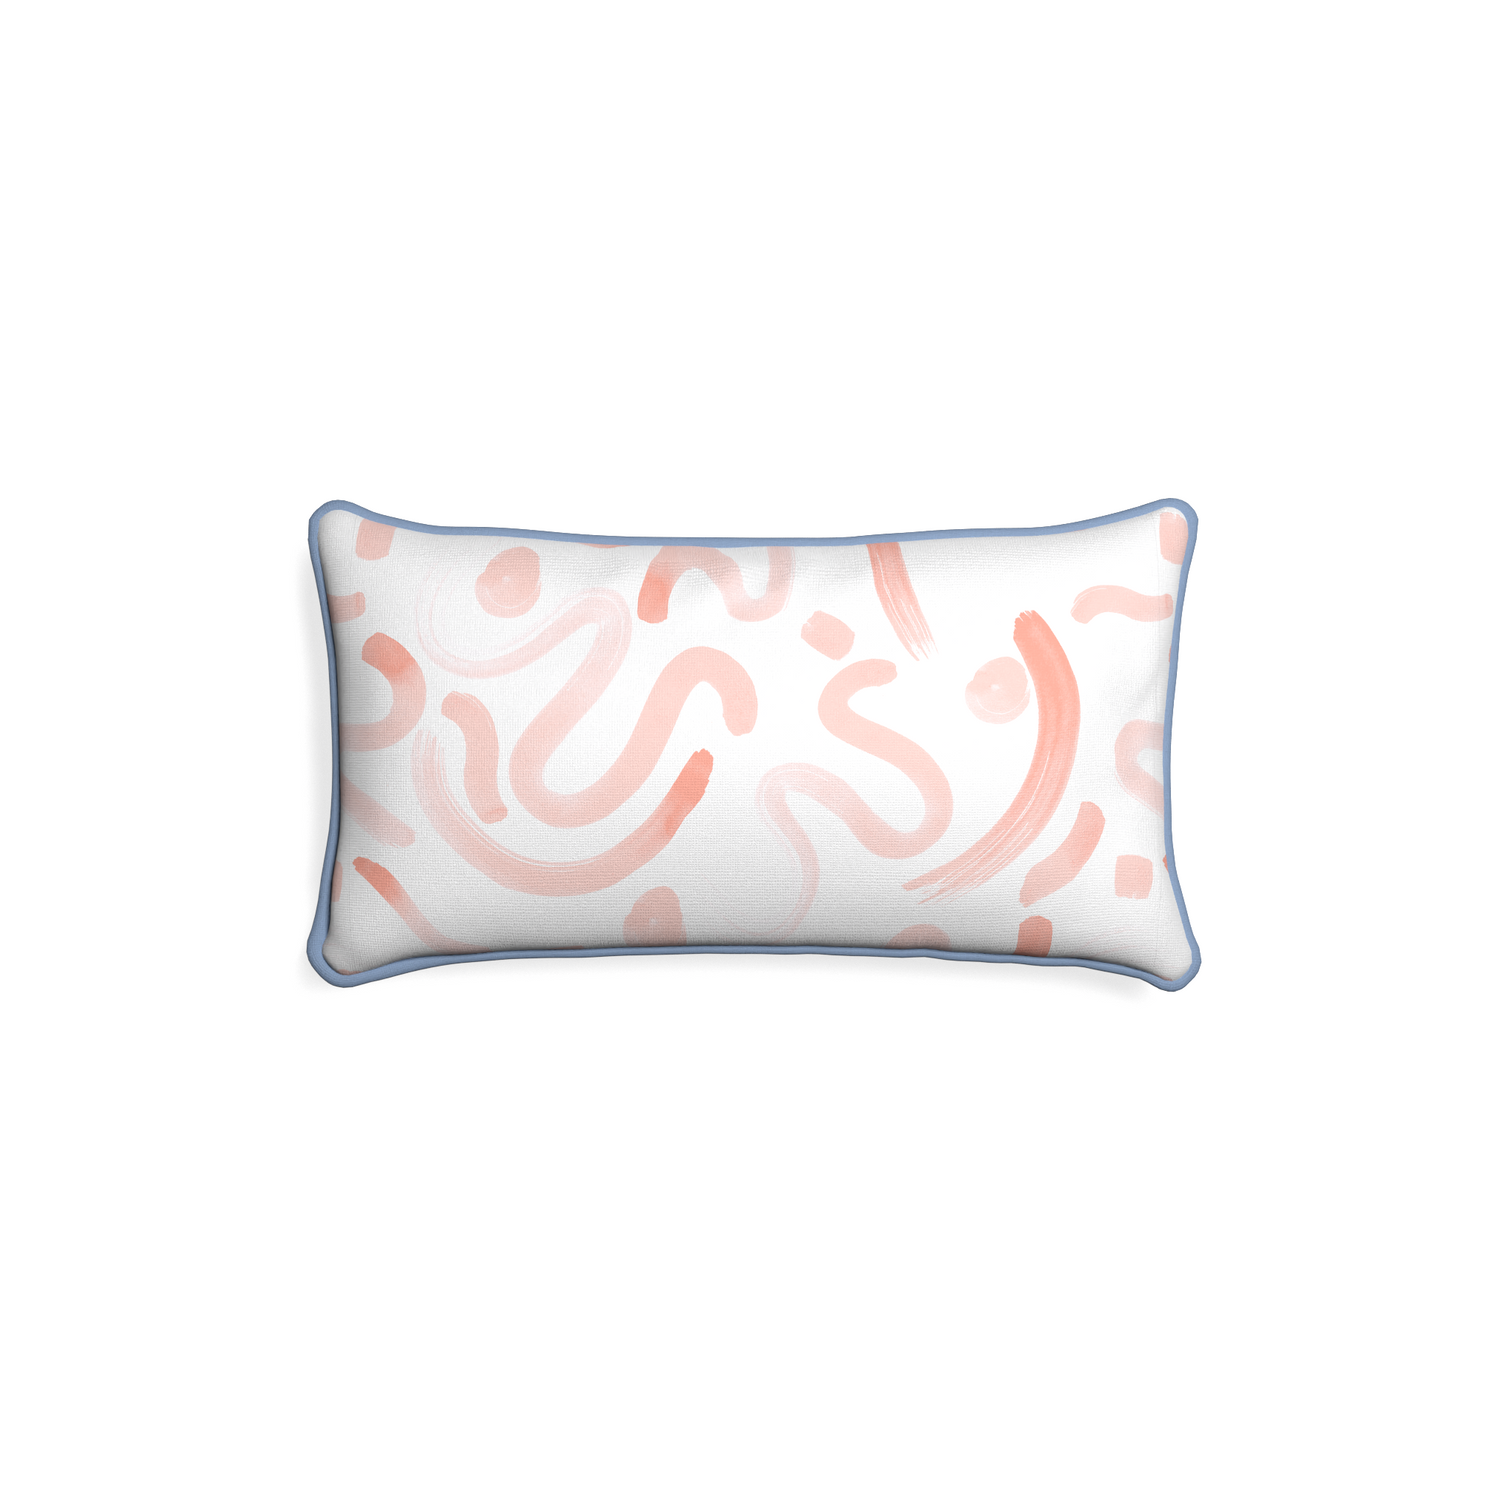 Petite-lumbar hockney pink custom pink graphicpillow with sky piping on white background